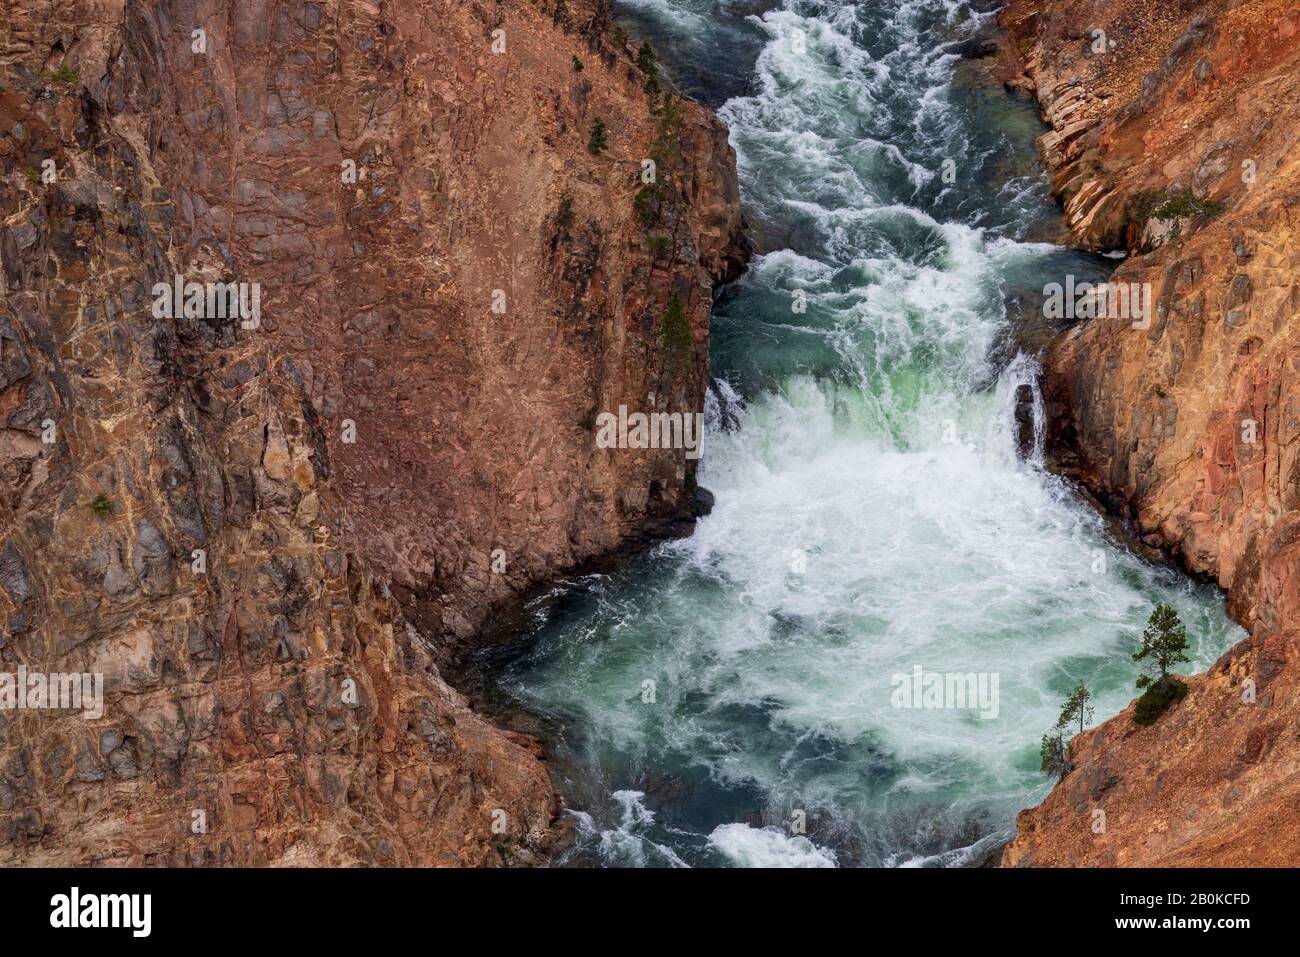 Rushing river water flowing down through steep canyon. Stock Photo